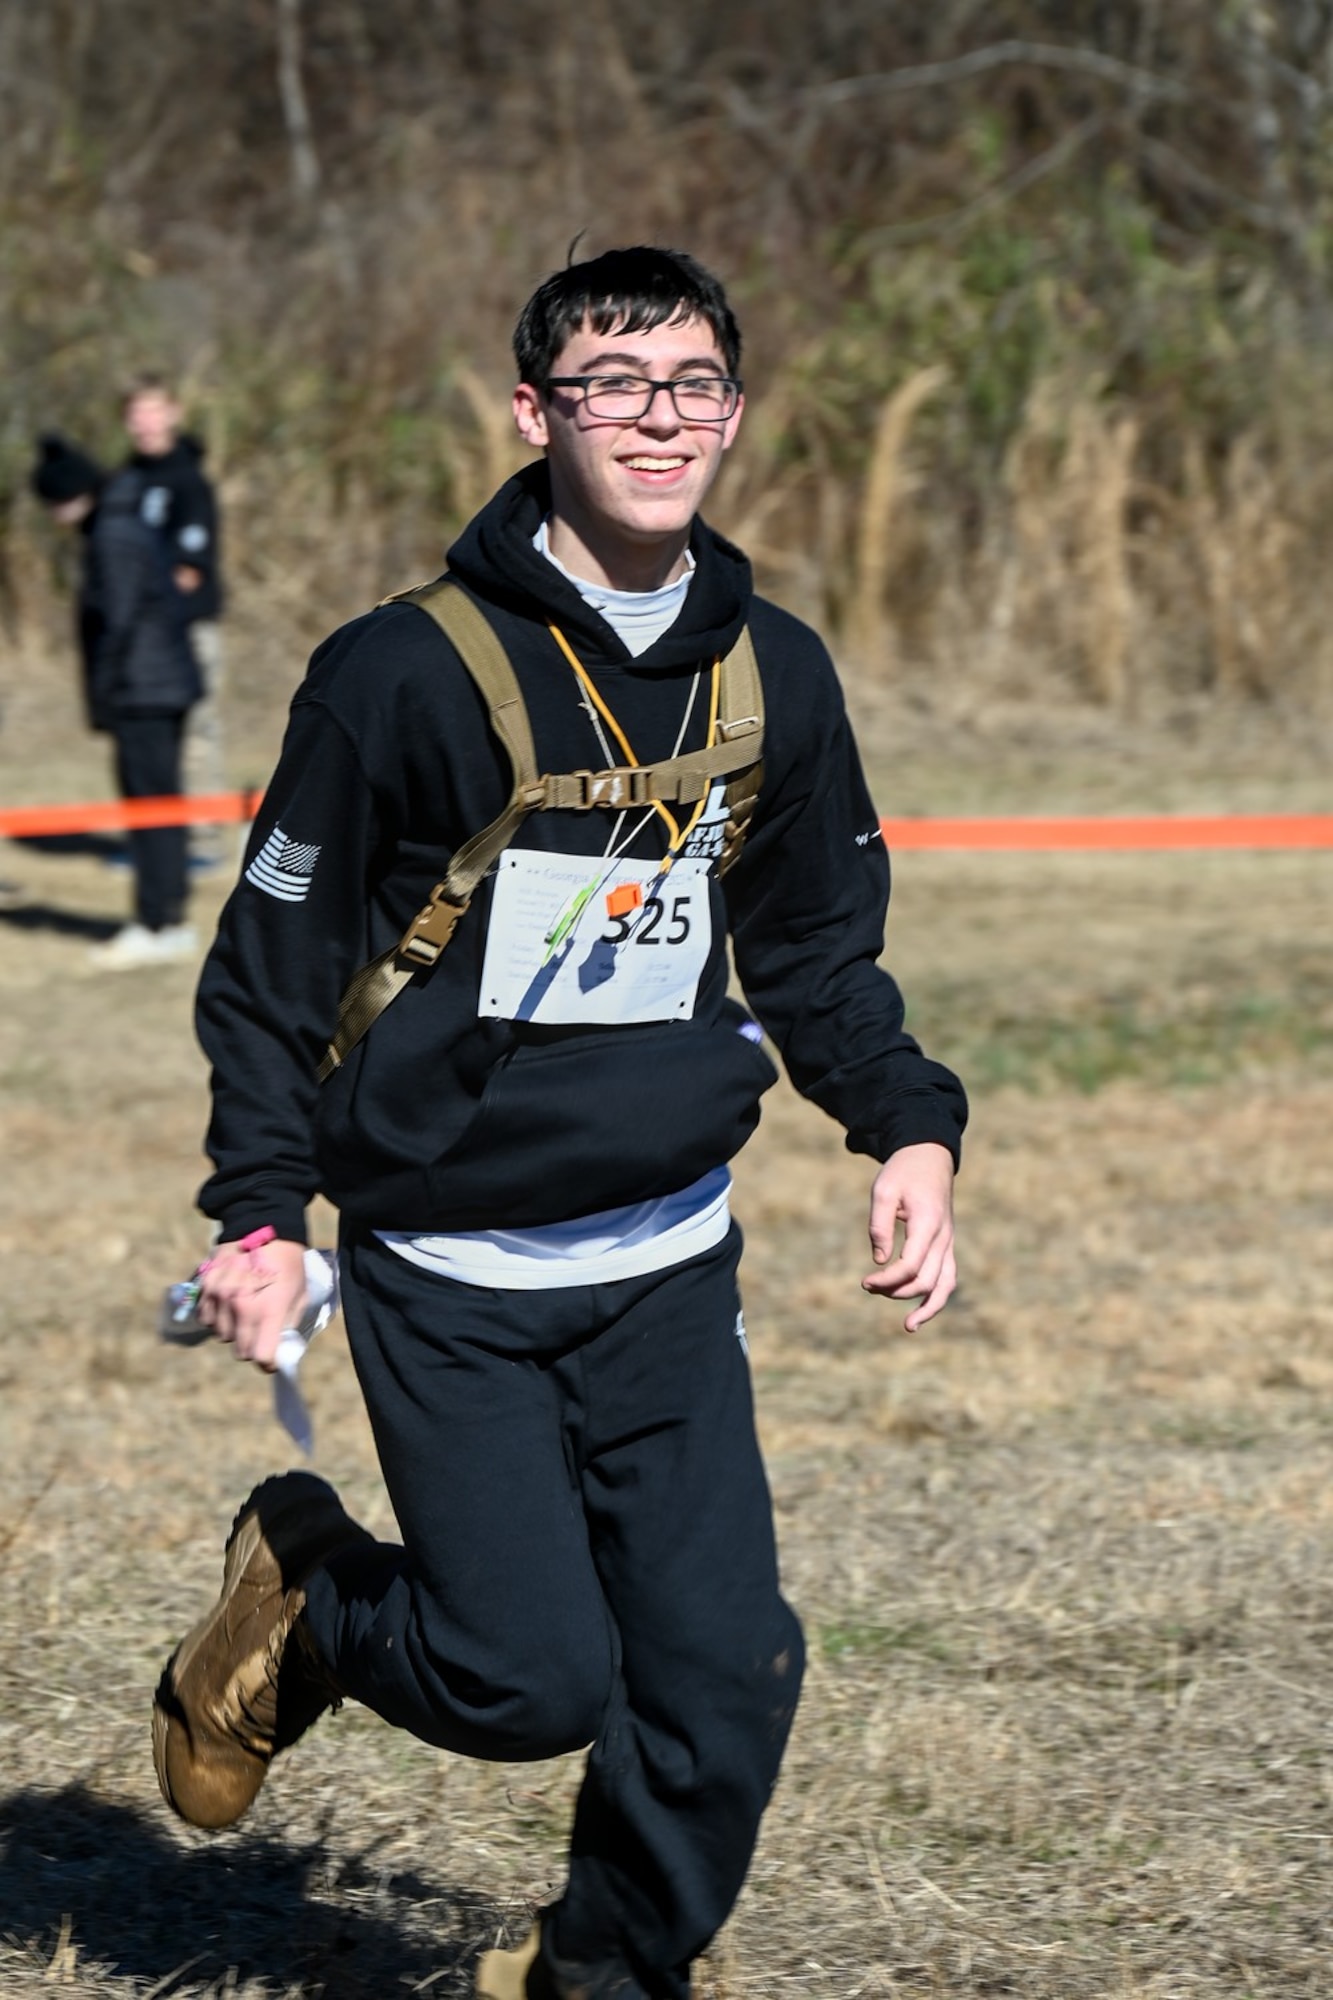 AFJROTC Cadet Peyton Hill competes at the Orienteering Nationals